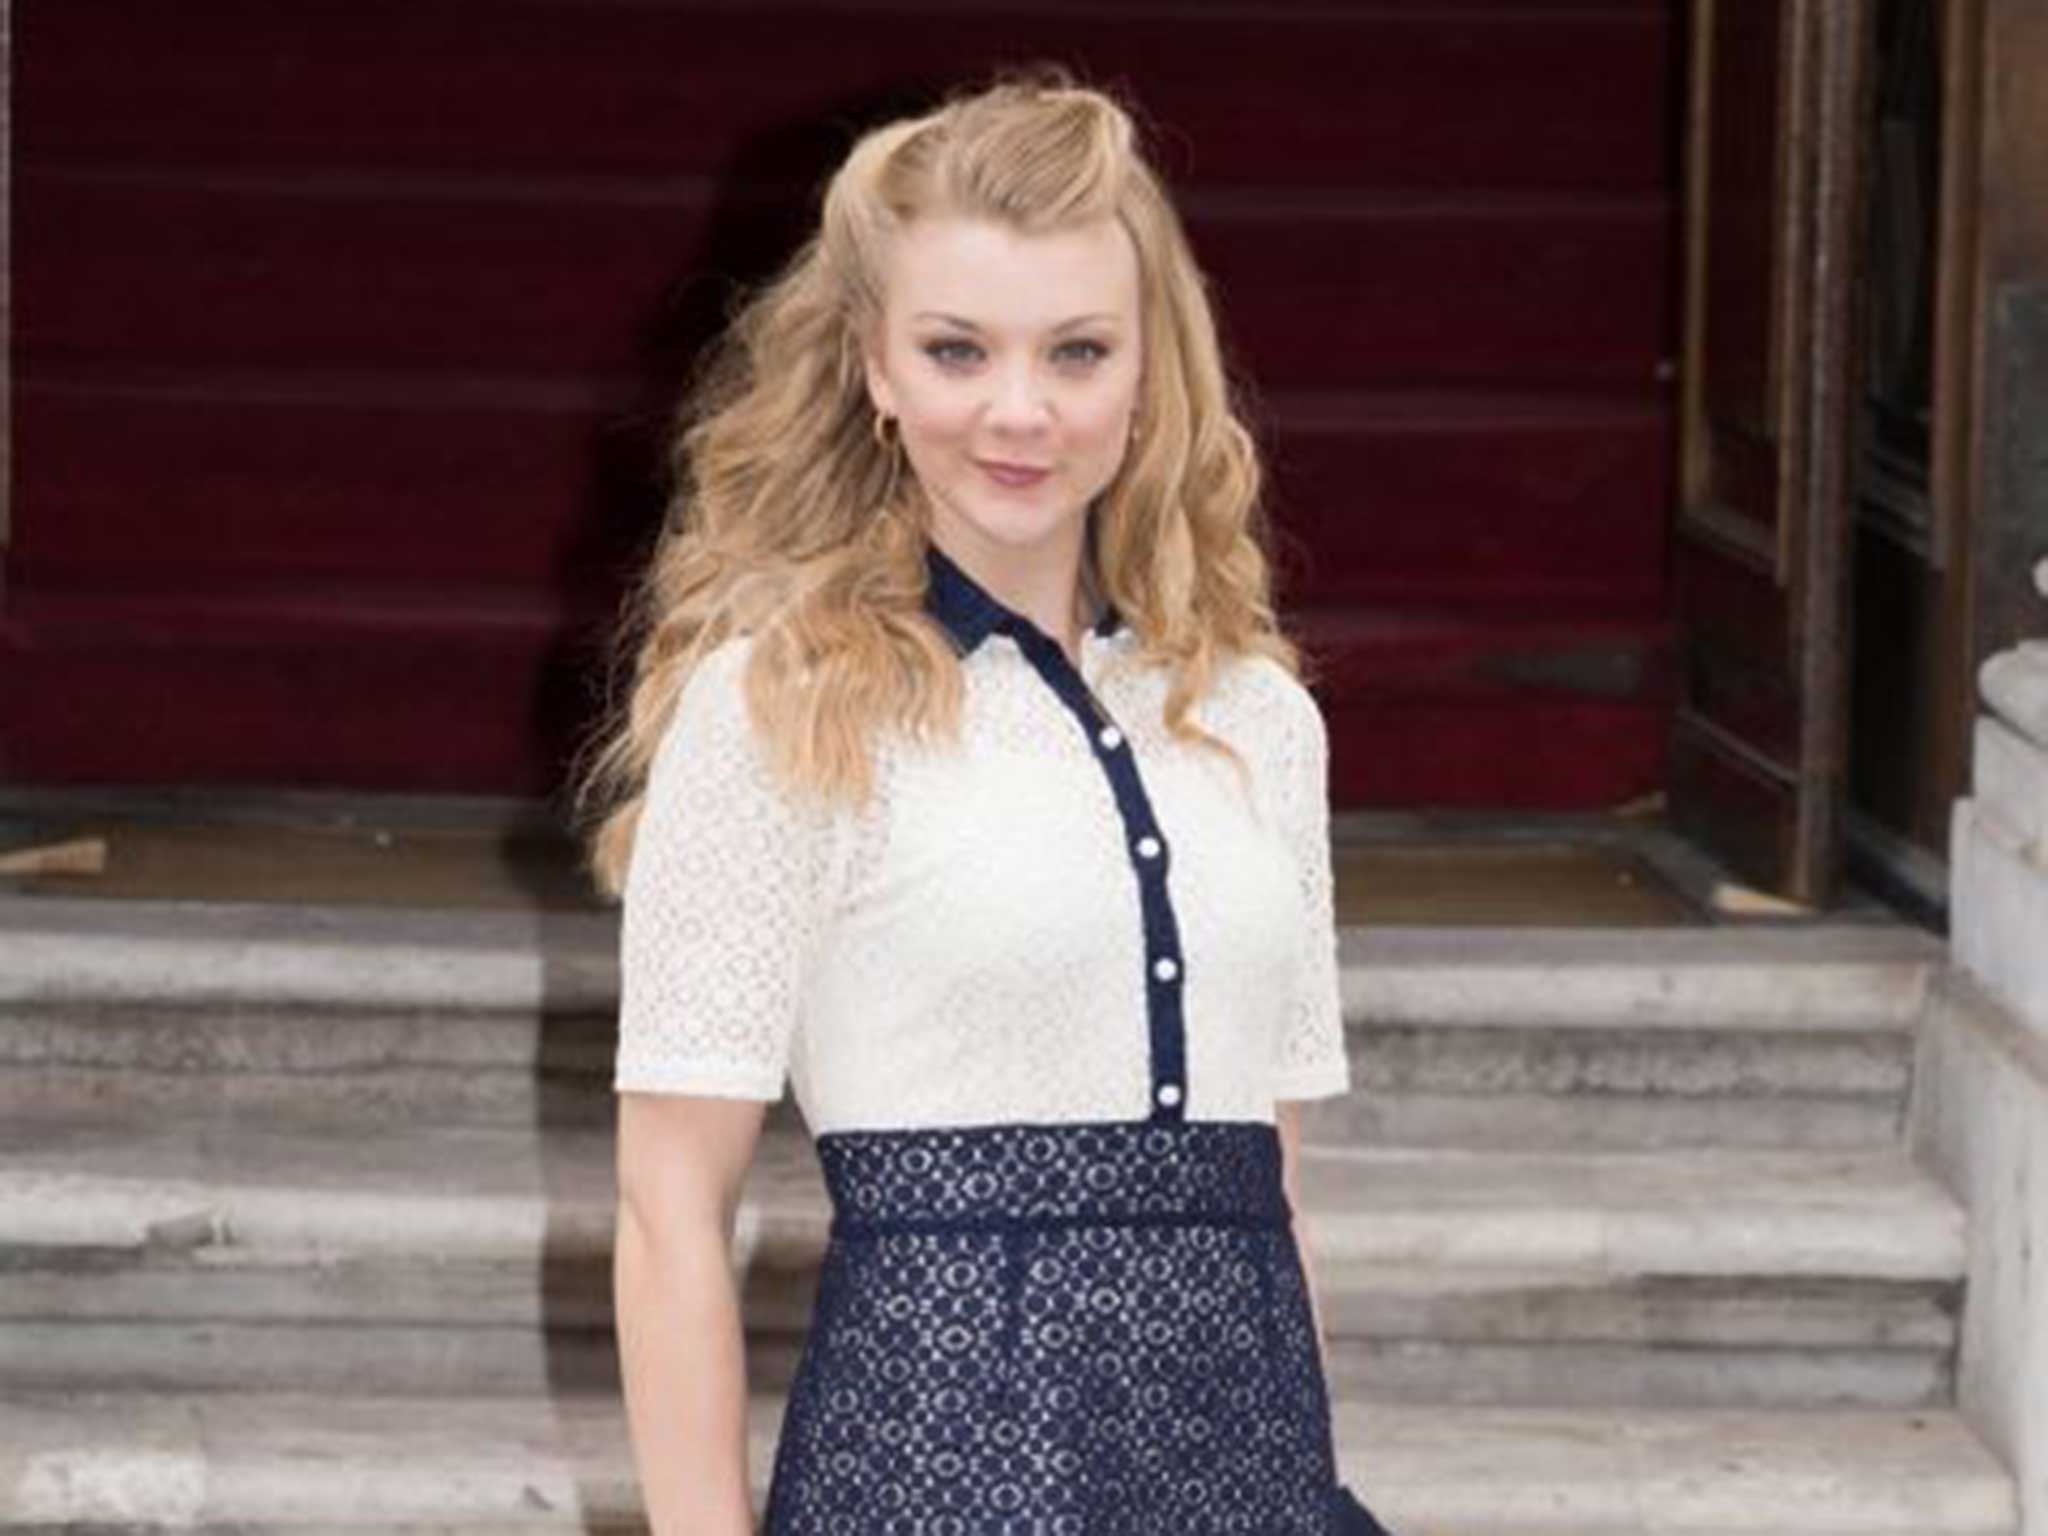 Natalie Dormer is believed to be playing a zombie in Patient Zero